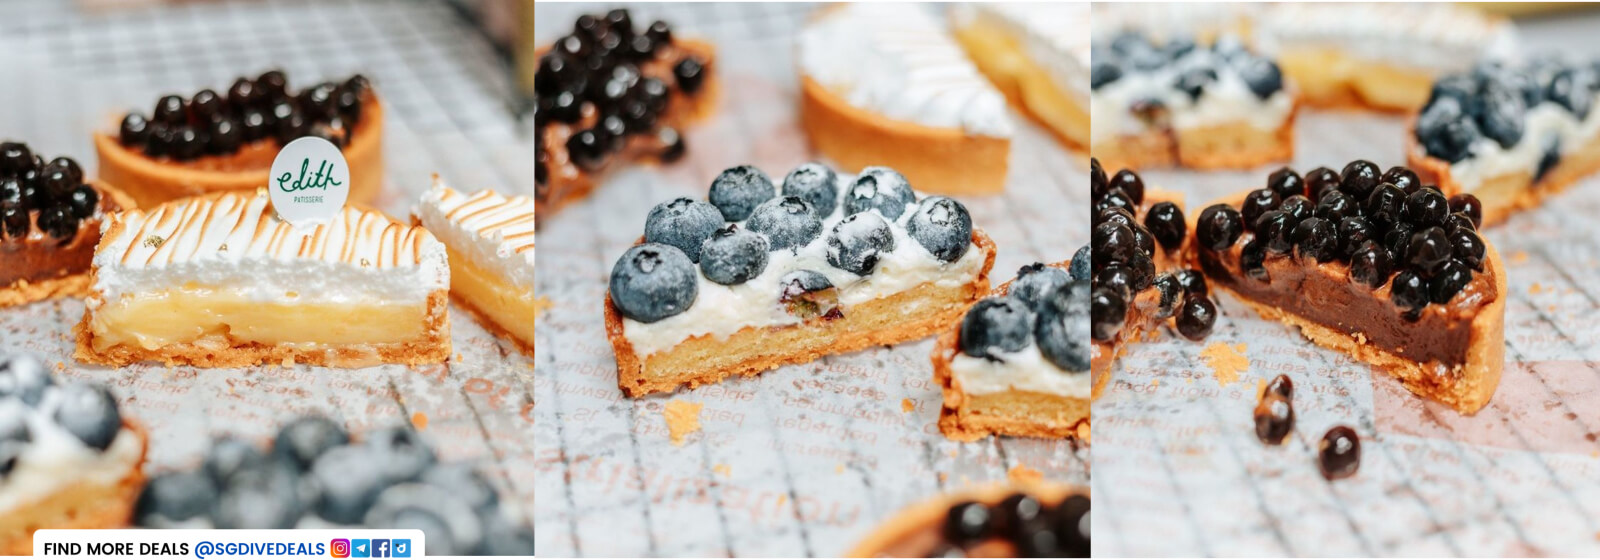 Edith Patisserie Cake Bar,50% Off for second tart